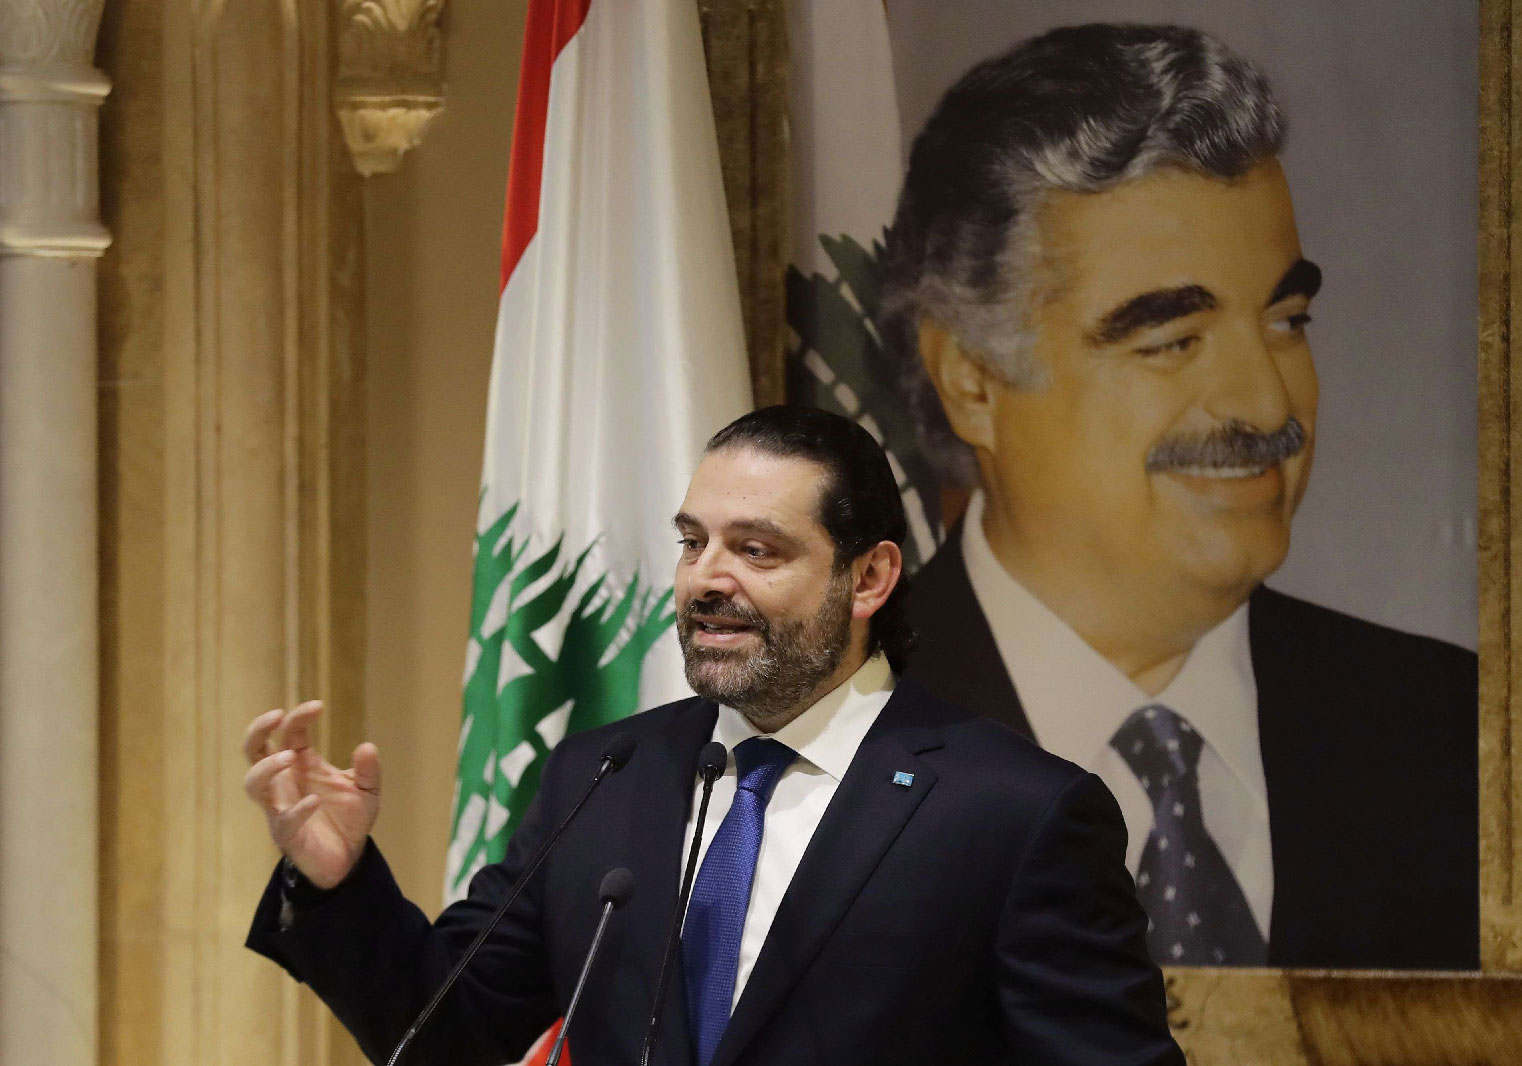 Lebanese Prime Minsiter Saad Hariri speaks during a press conference at his residence in downtown Beirut on November 13, 2018.